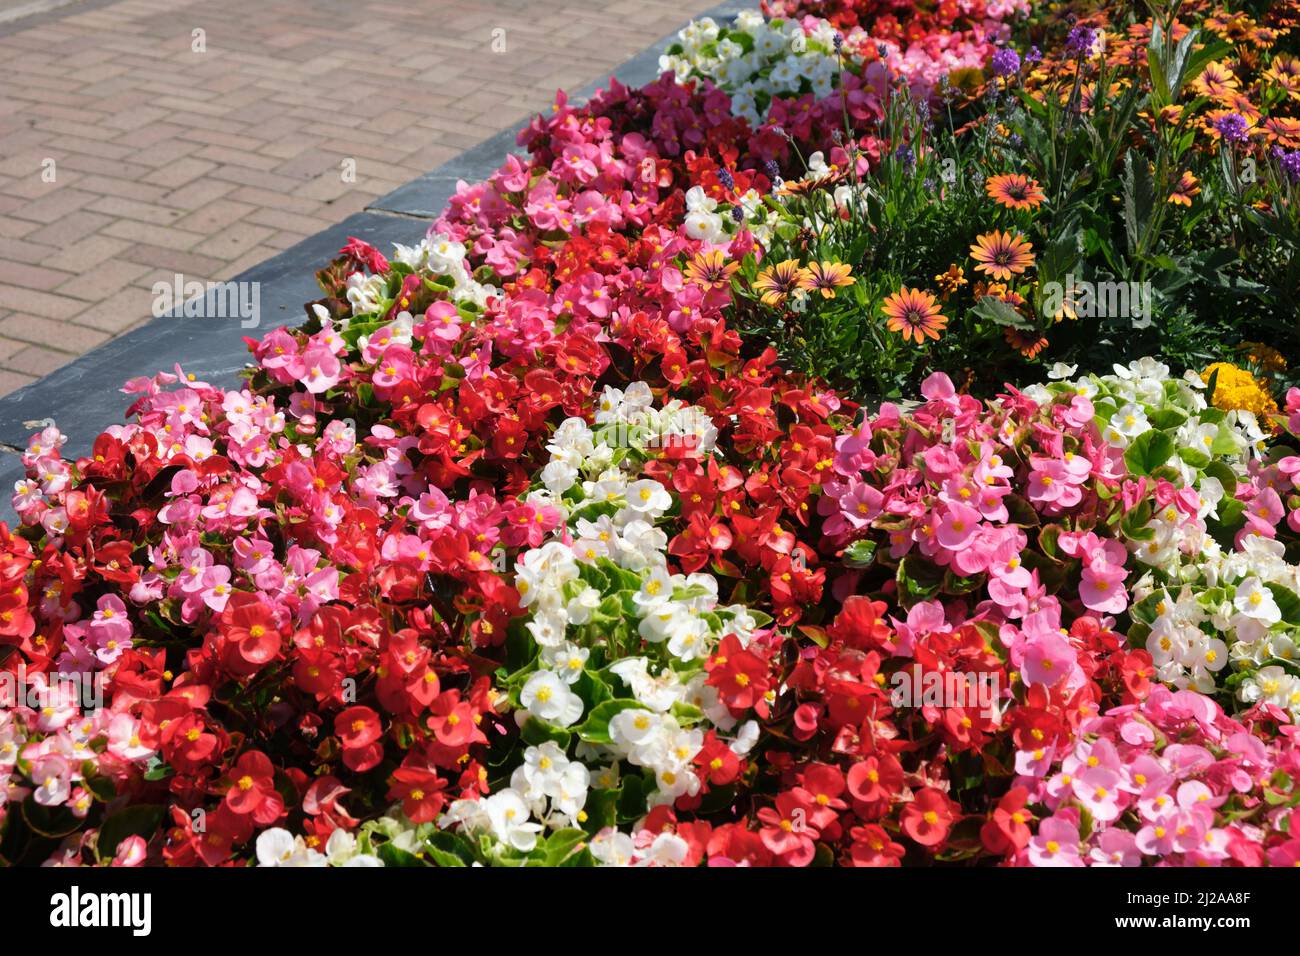 A display of various flowers in a cultivated flower border. Stock Photo